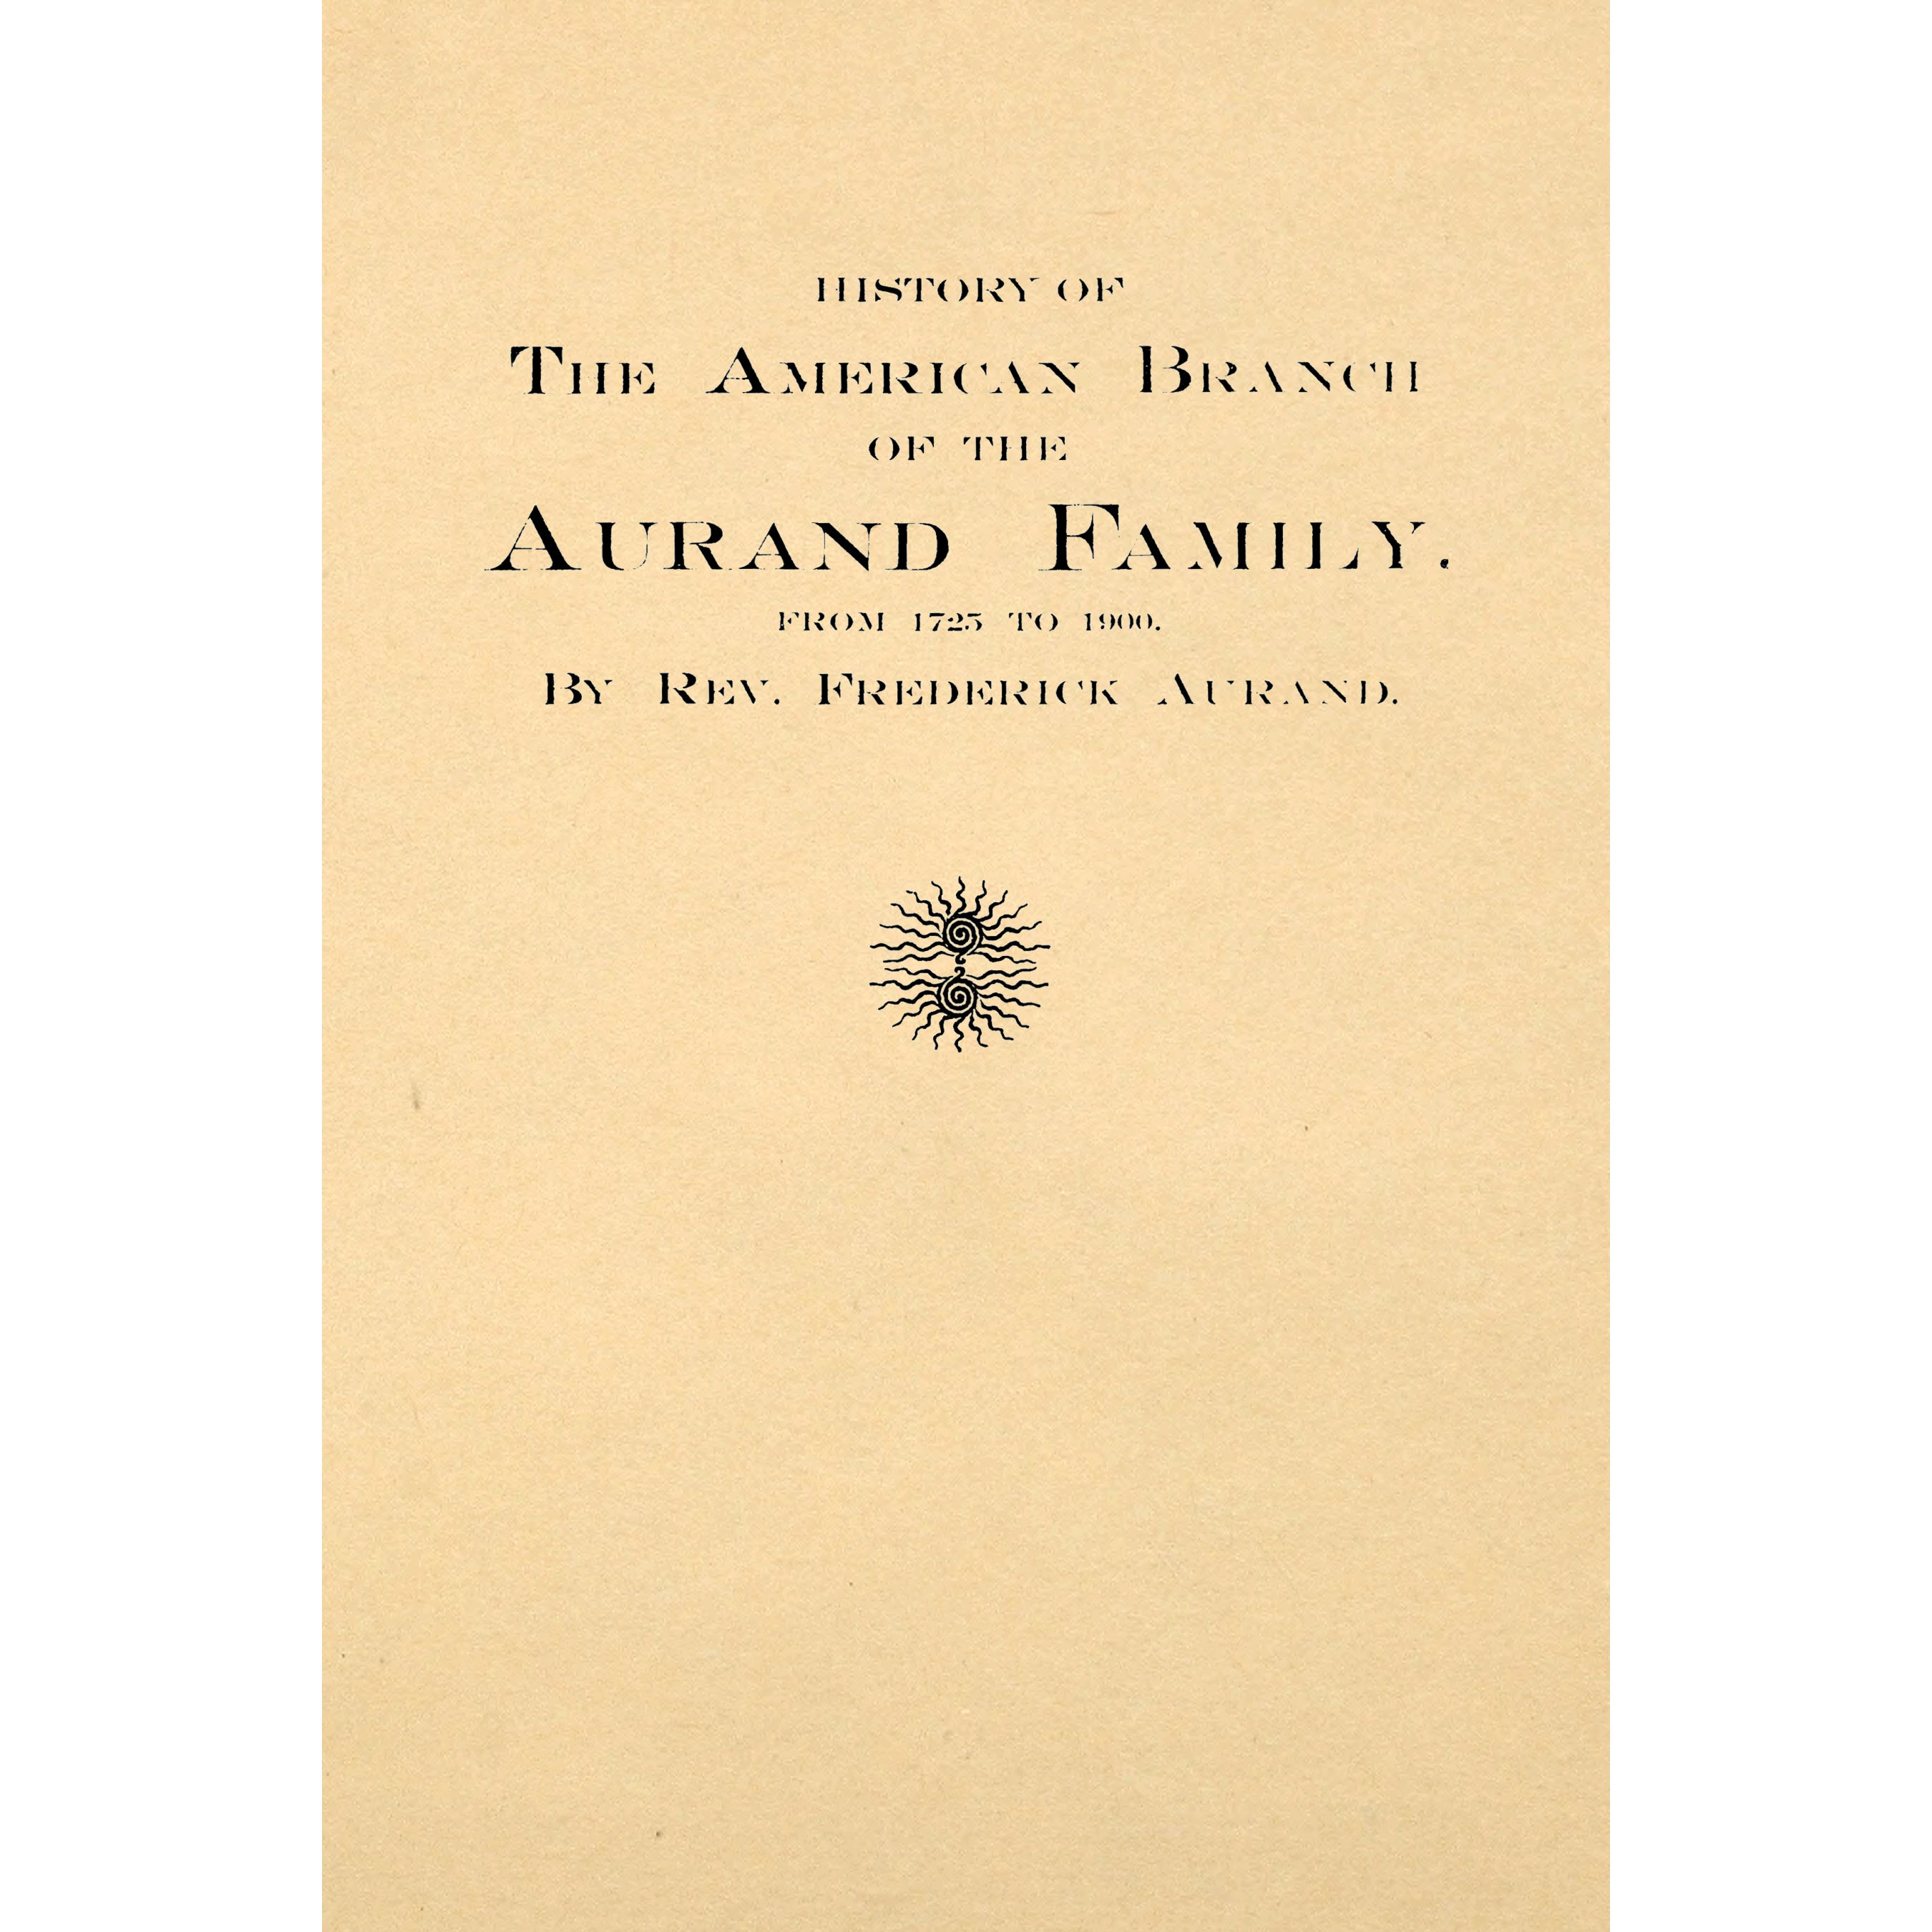 History of the American branch of the Aurand family : from 1725 to 1900